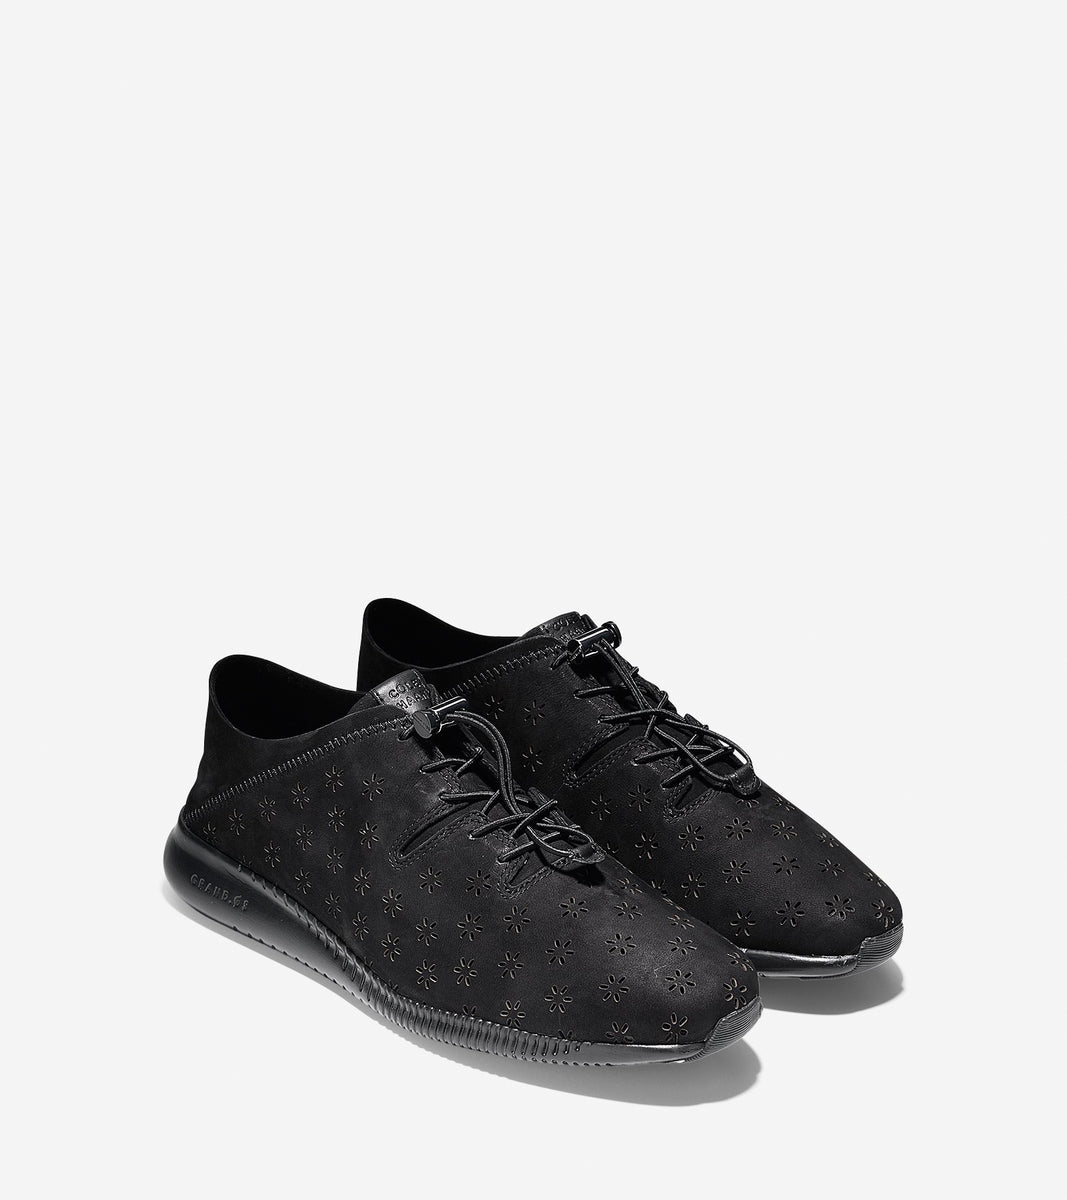 ColeHaan-StudiøGrand Pack-and-Go Sneaker-w10574-Black Perforated-black